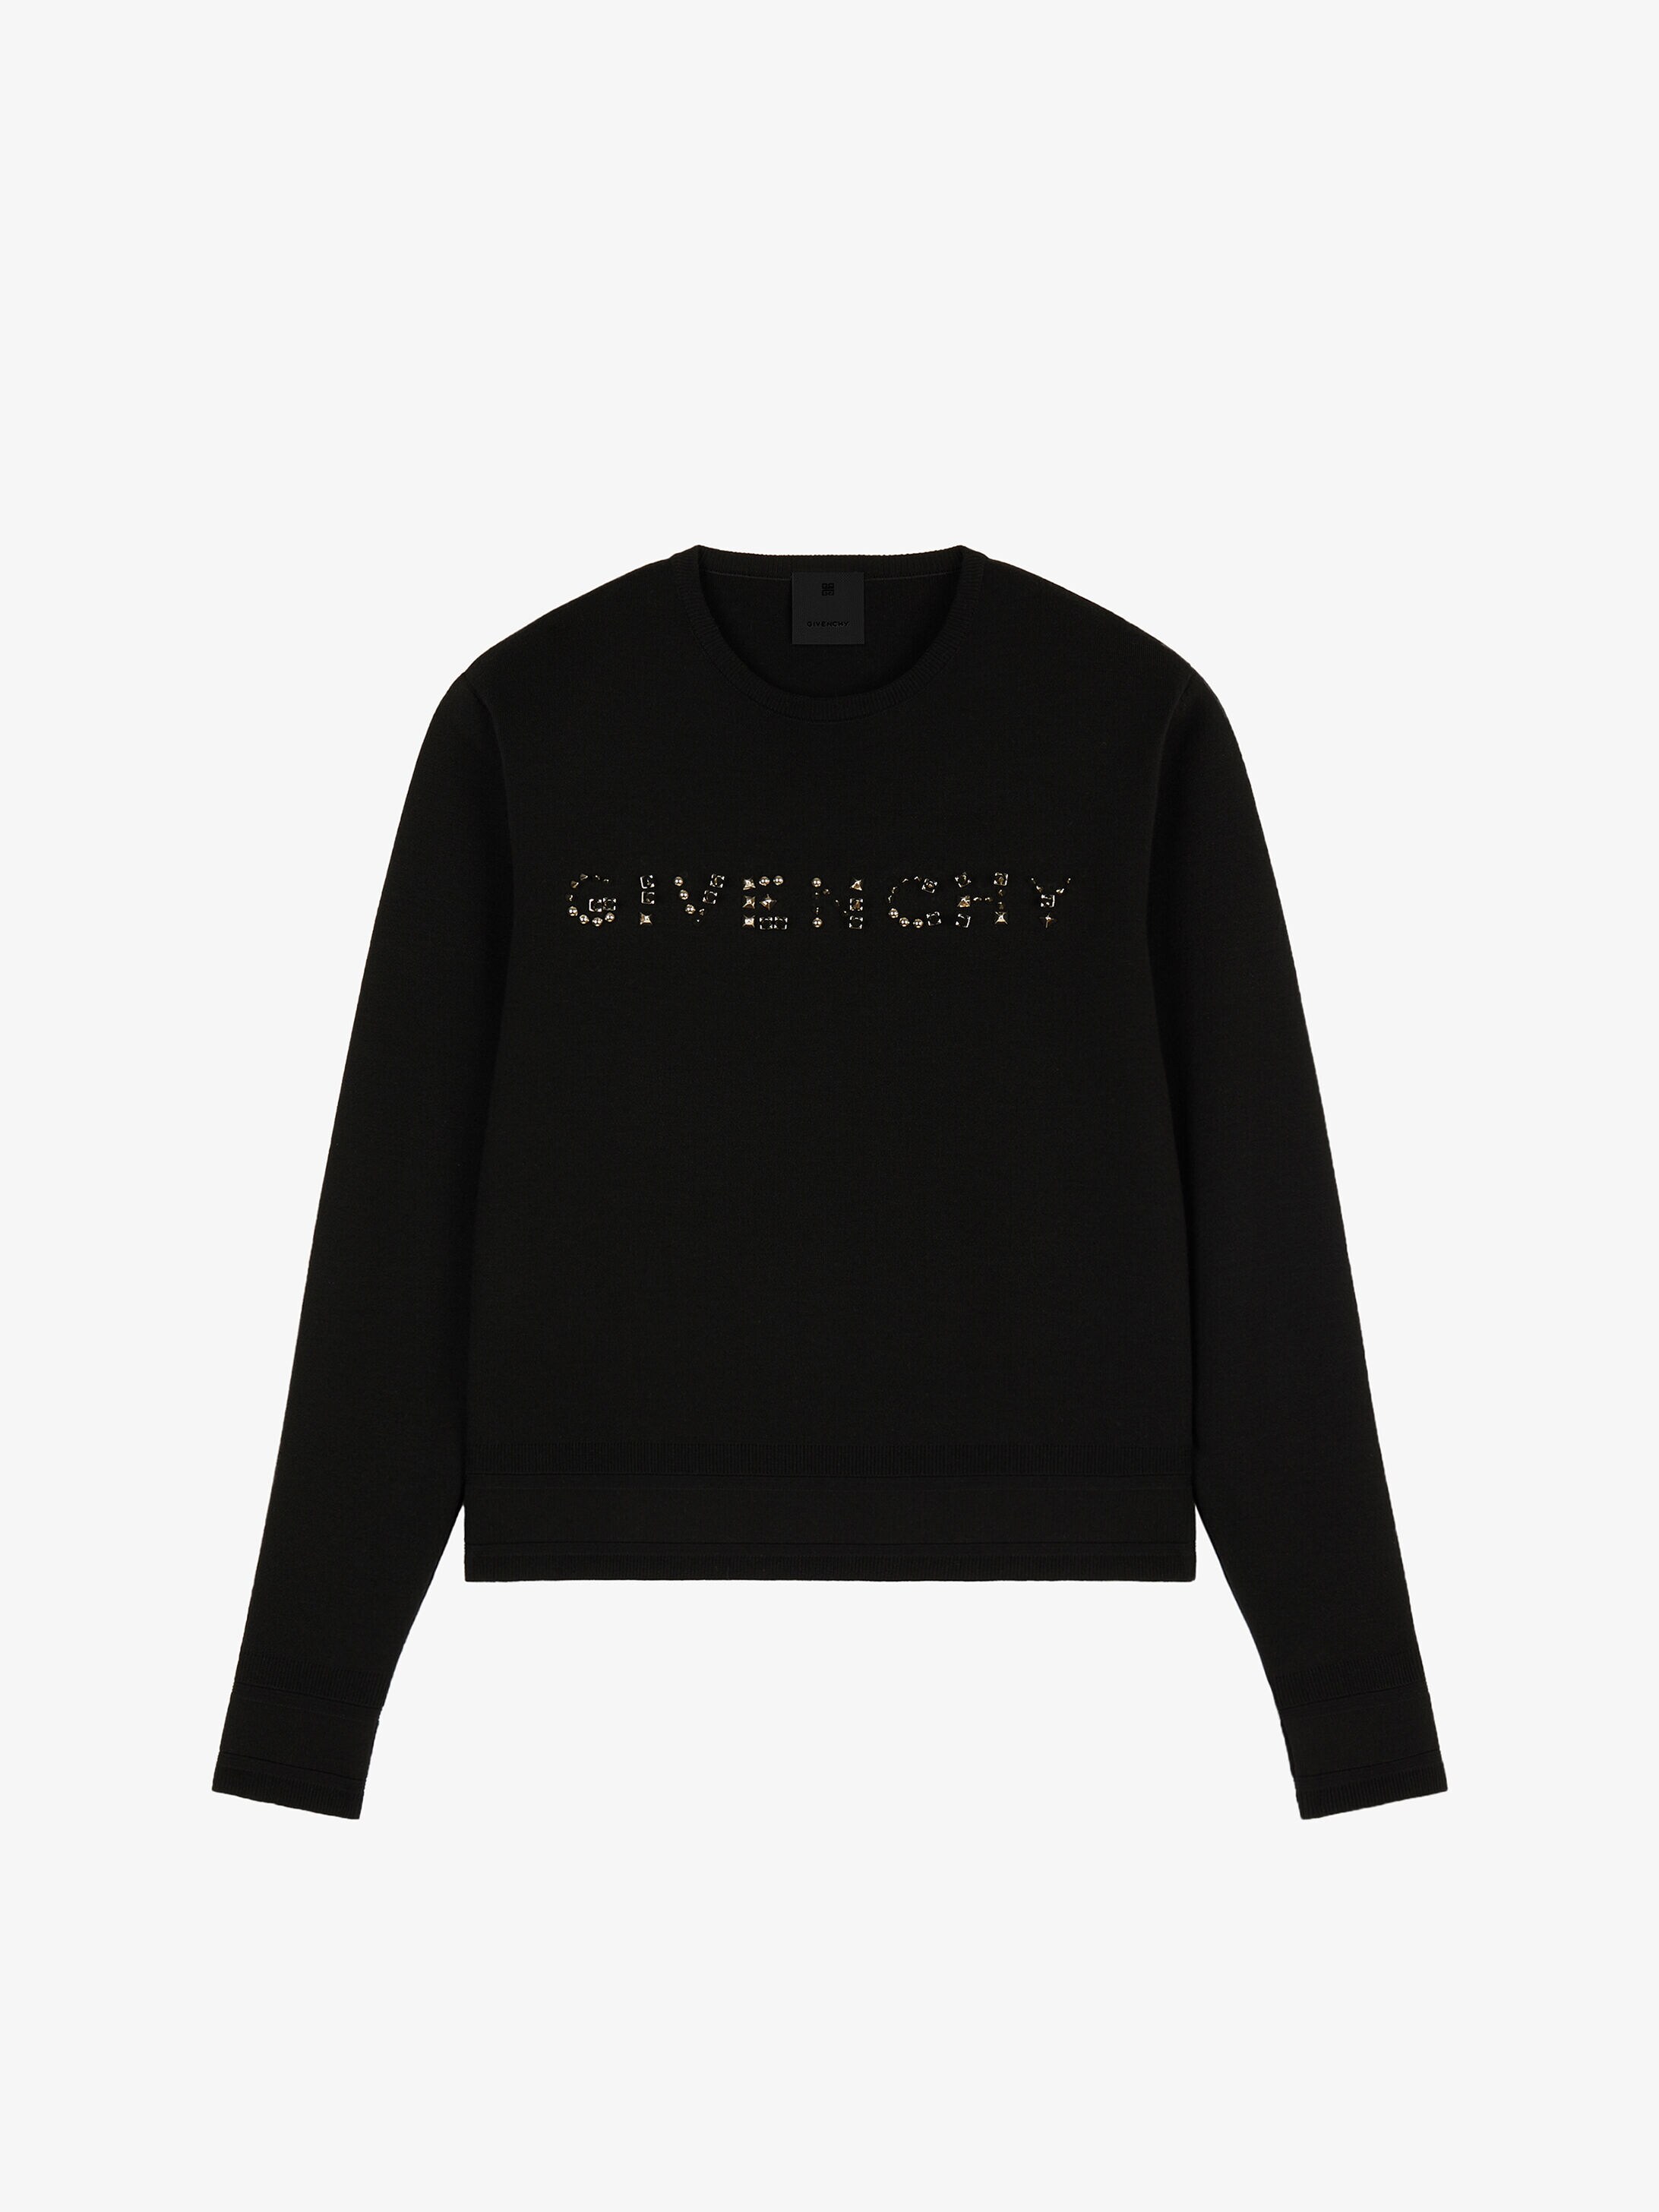 givenchy red jumper